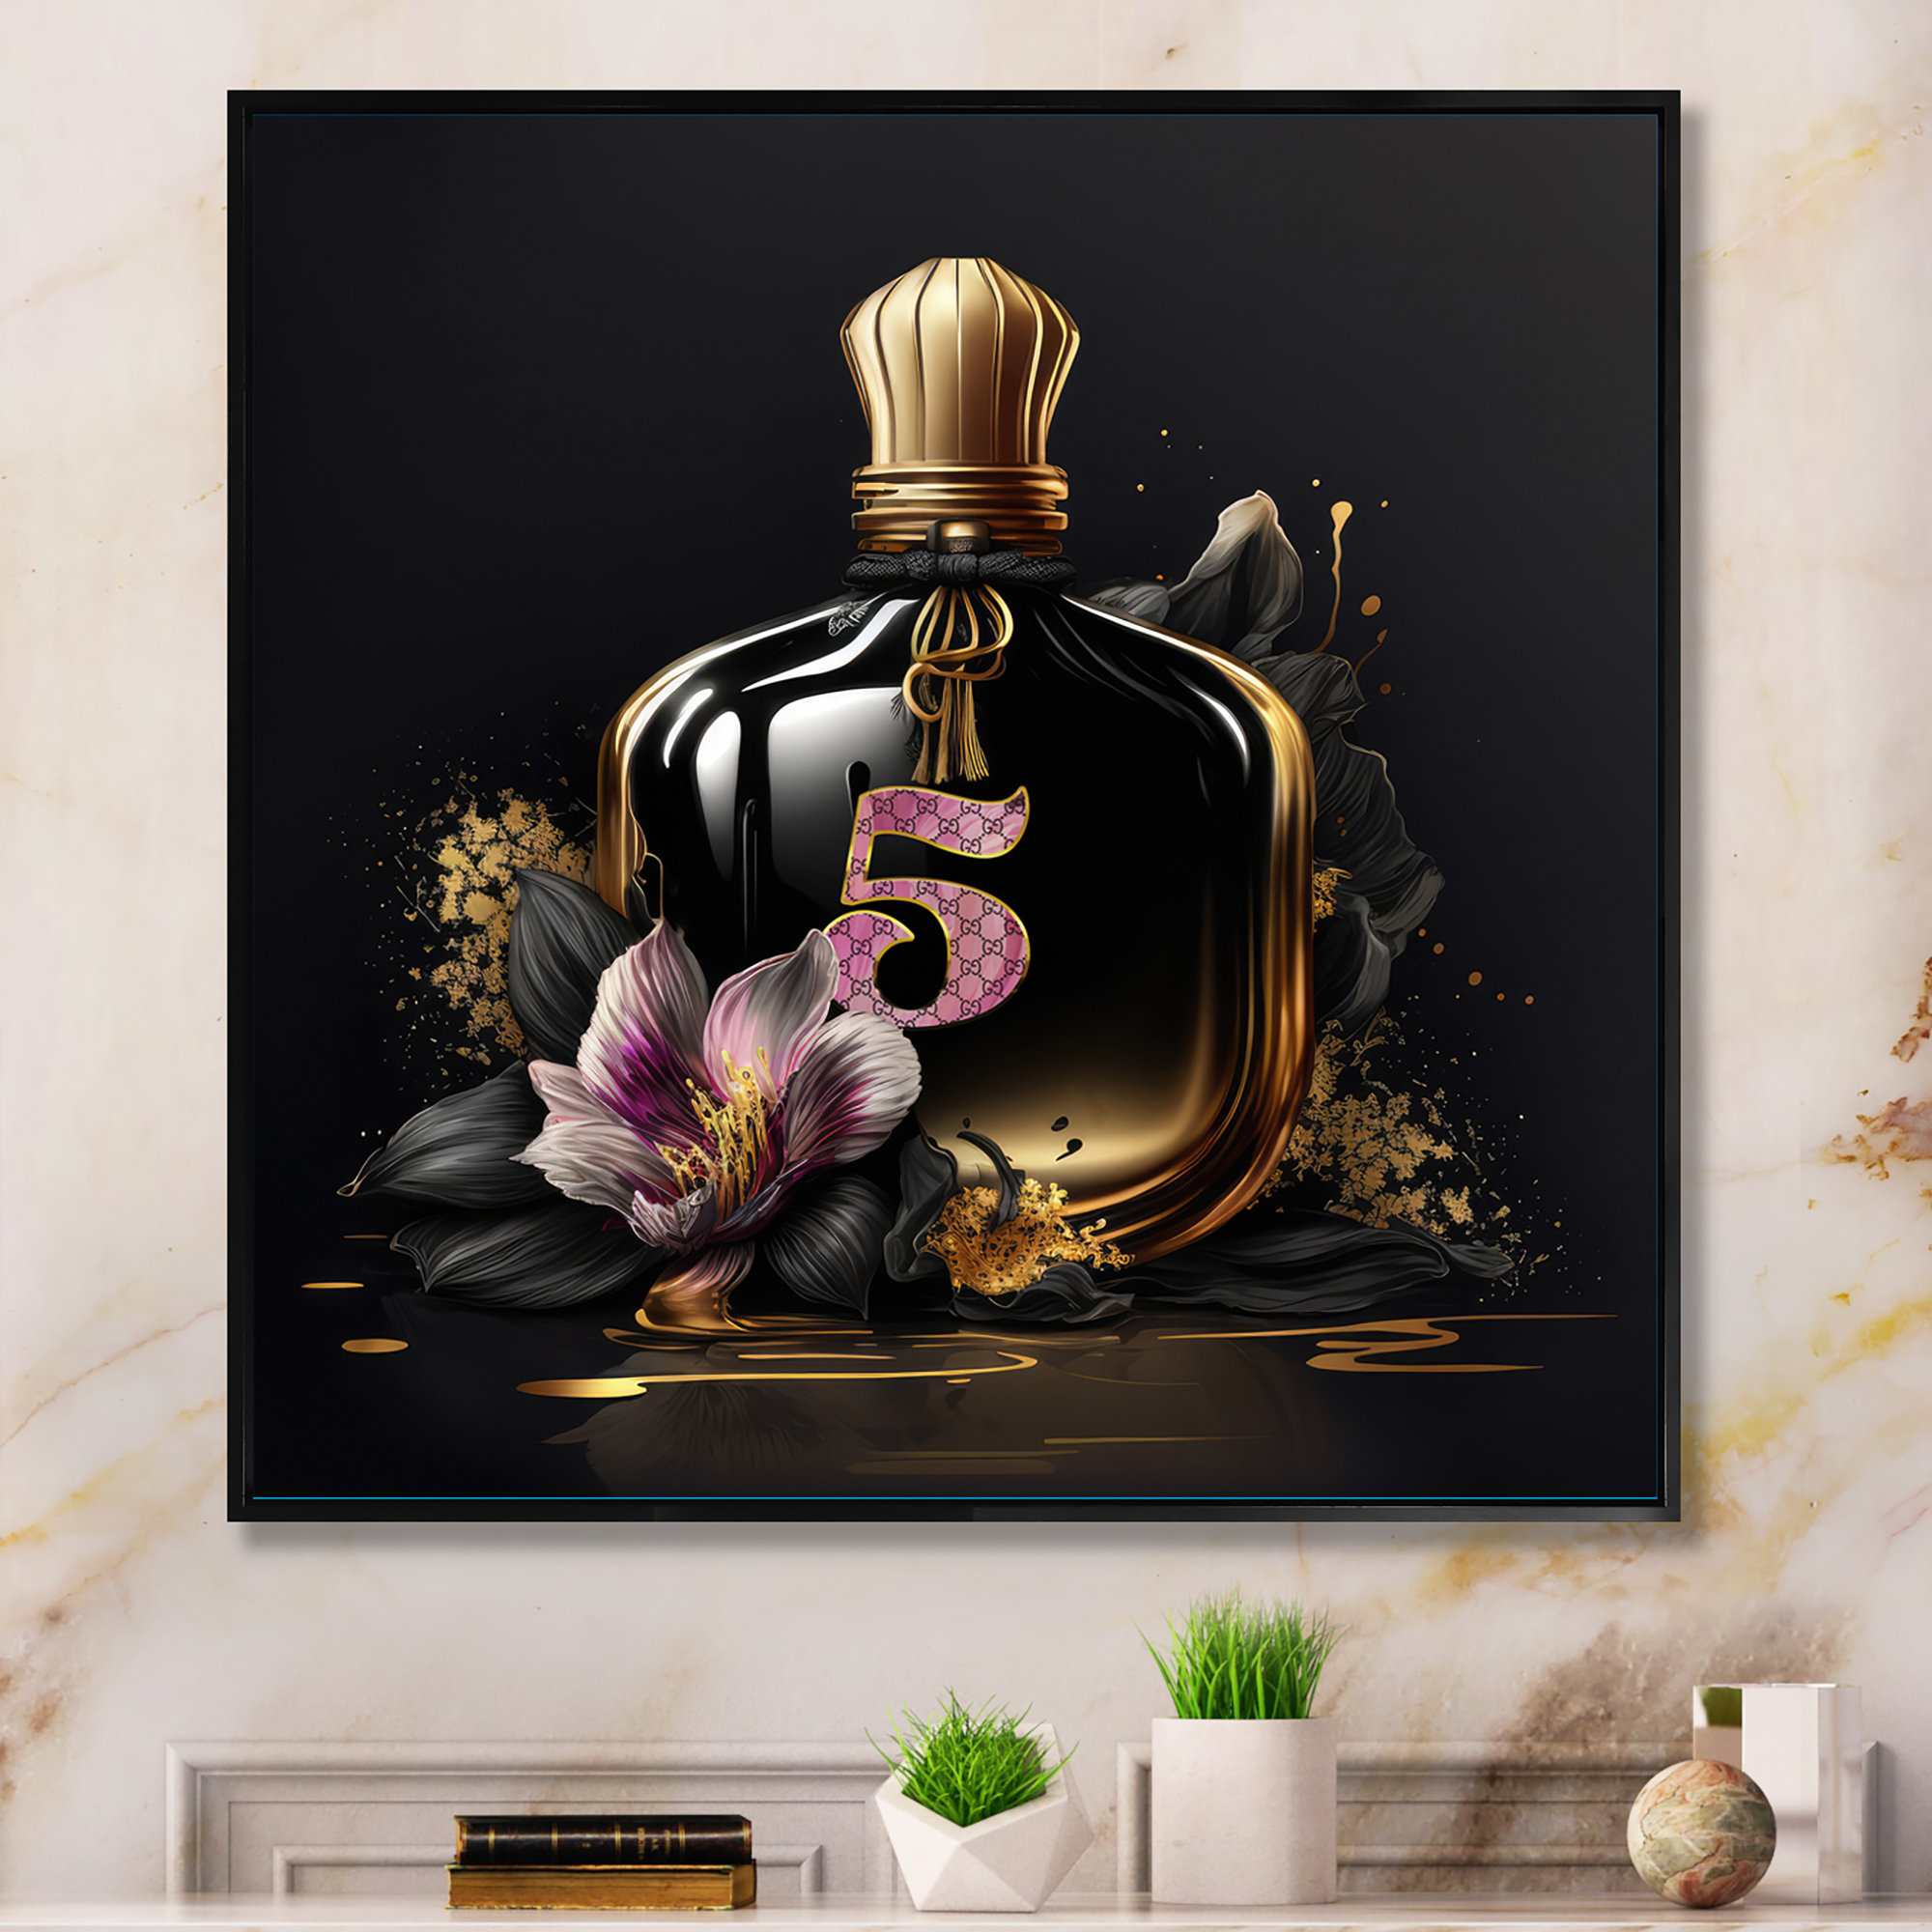 Chic Black and Gold Perfume Bottle VI - Graphic Art on Canvas Design Art Format: Black Floater Framed Canvas, Size: 30 H x 30 W x 1 D